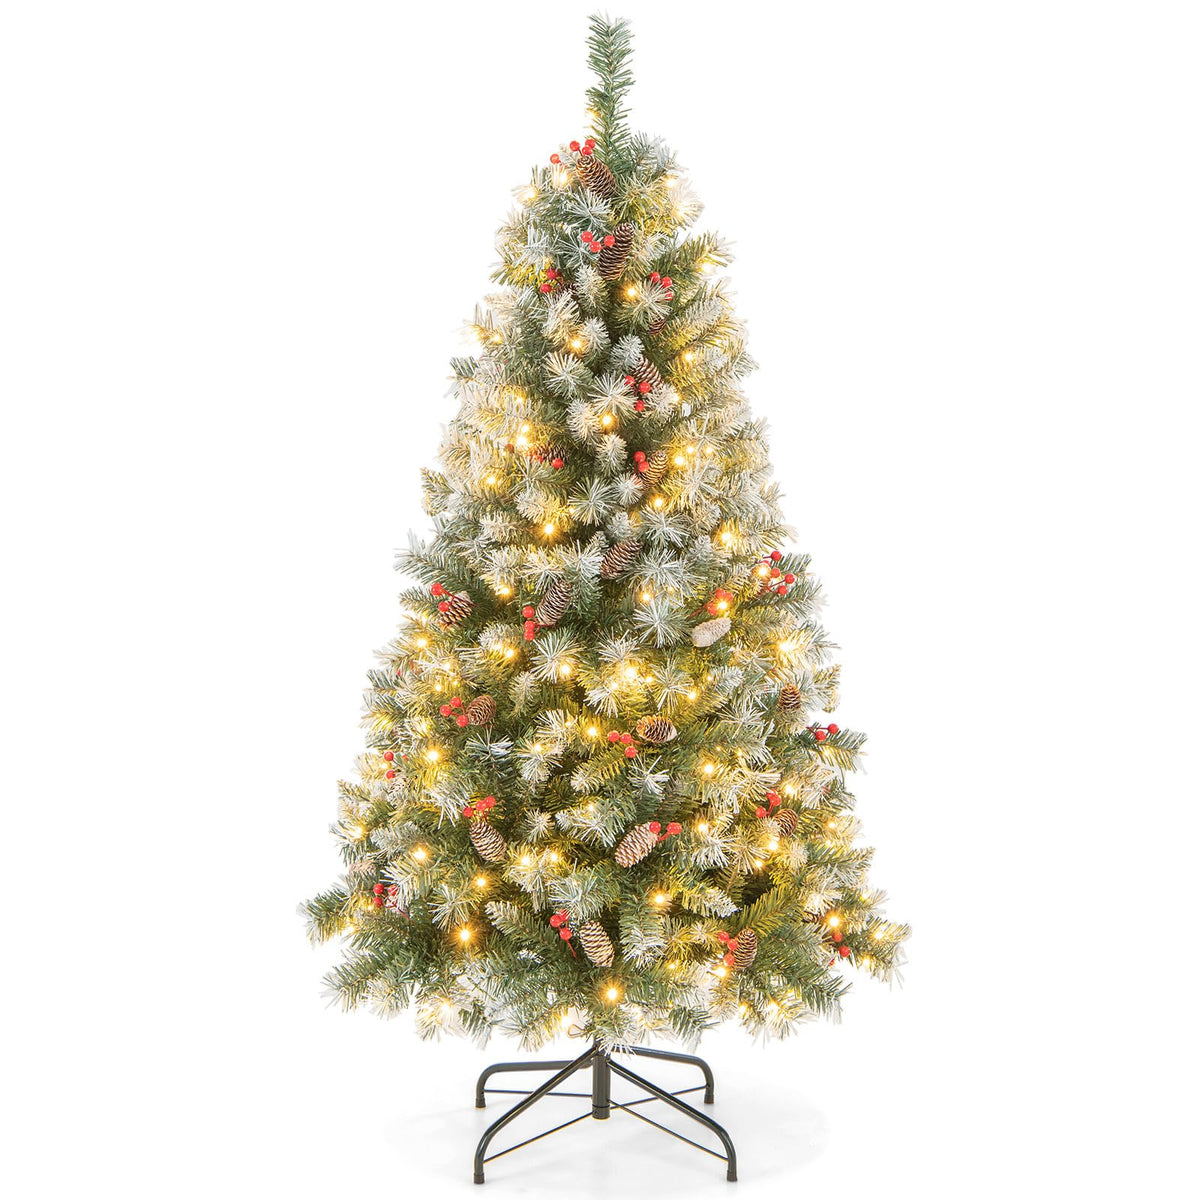 Goplus 5ft Pre-Lit Christmas Tree, Artificial Hinged Xmas Tree with 200 Warm-White LED Lights